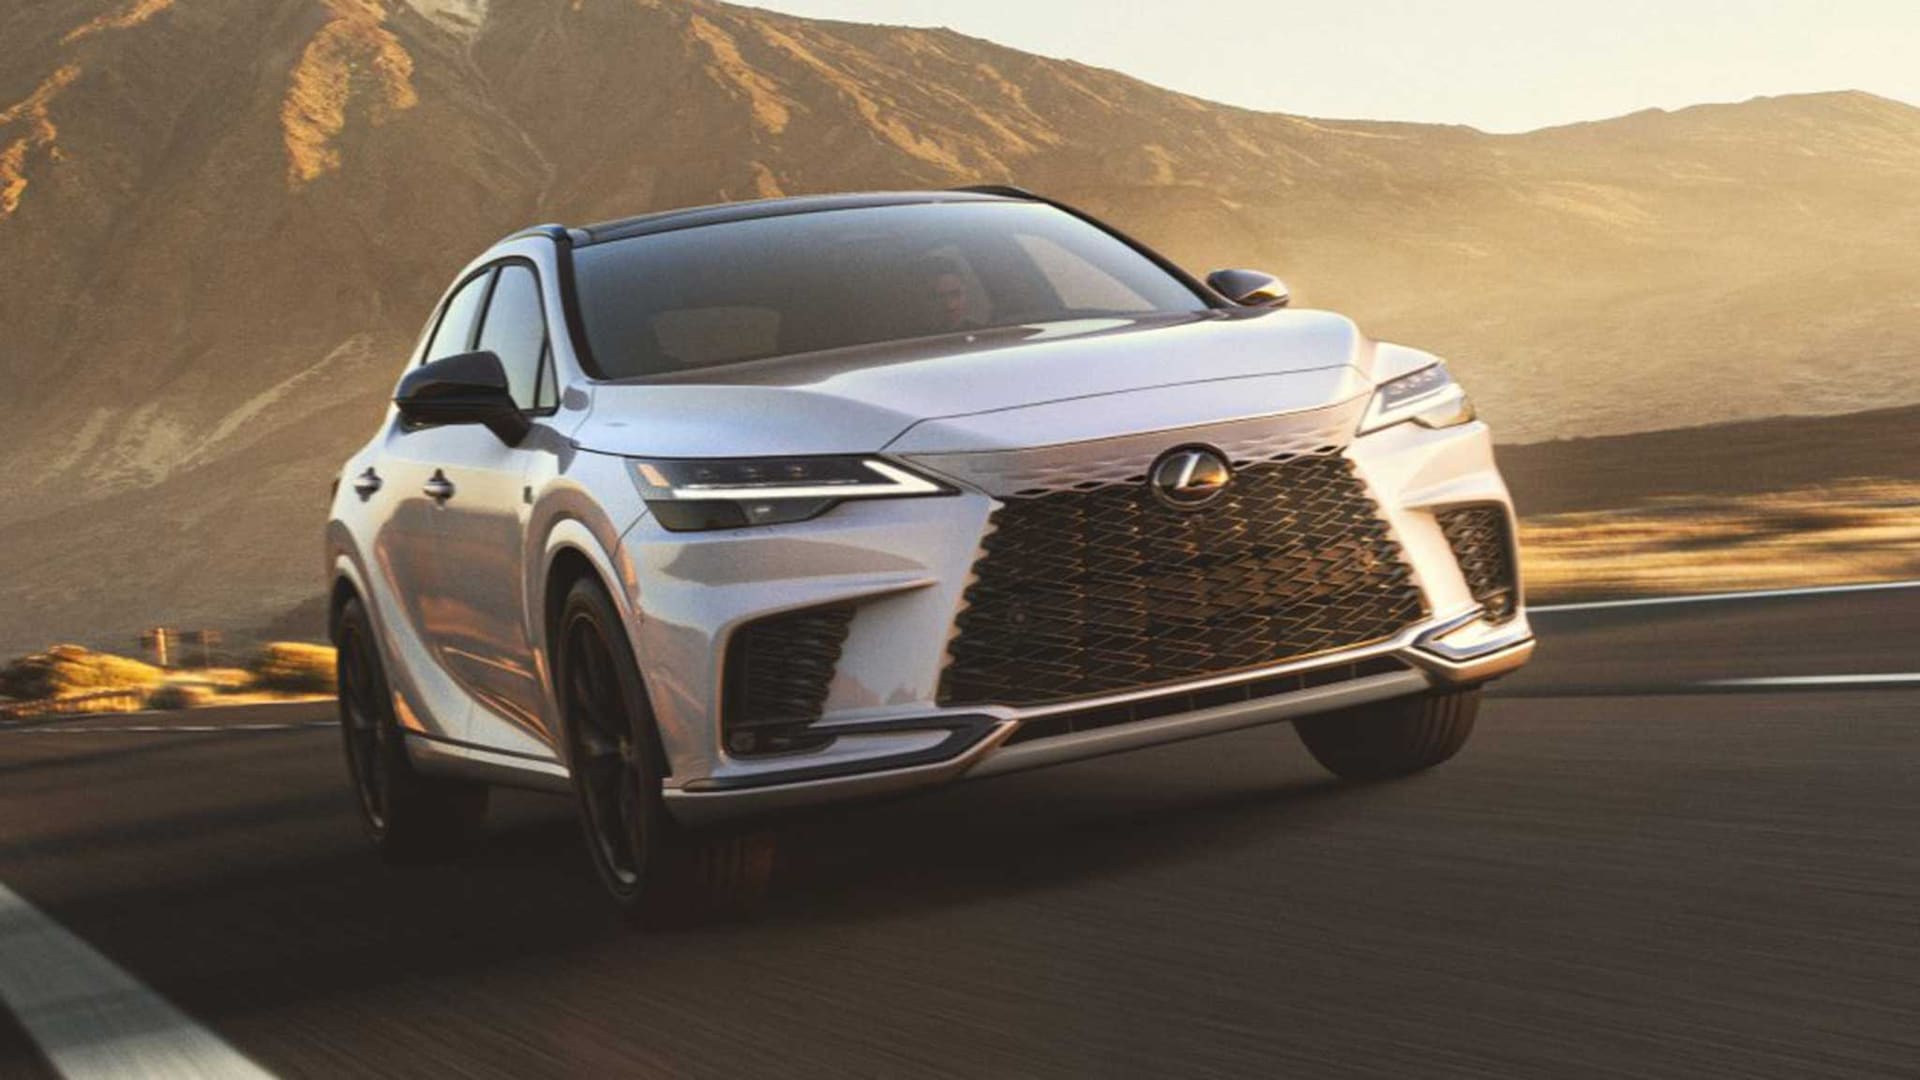 2023 Lexus RX First Look: A Luxury Crossover Reset